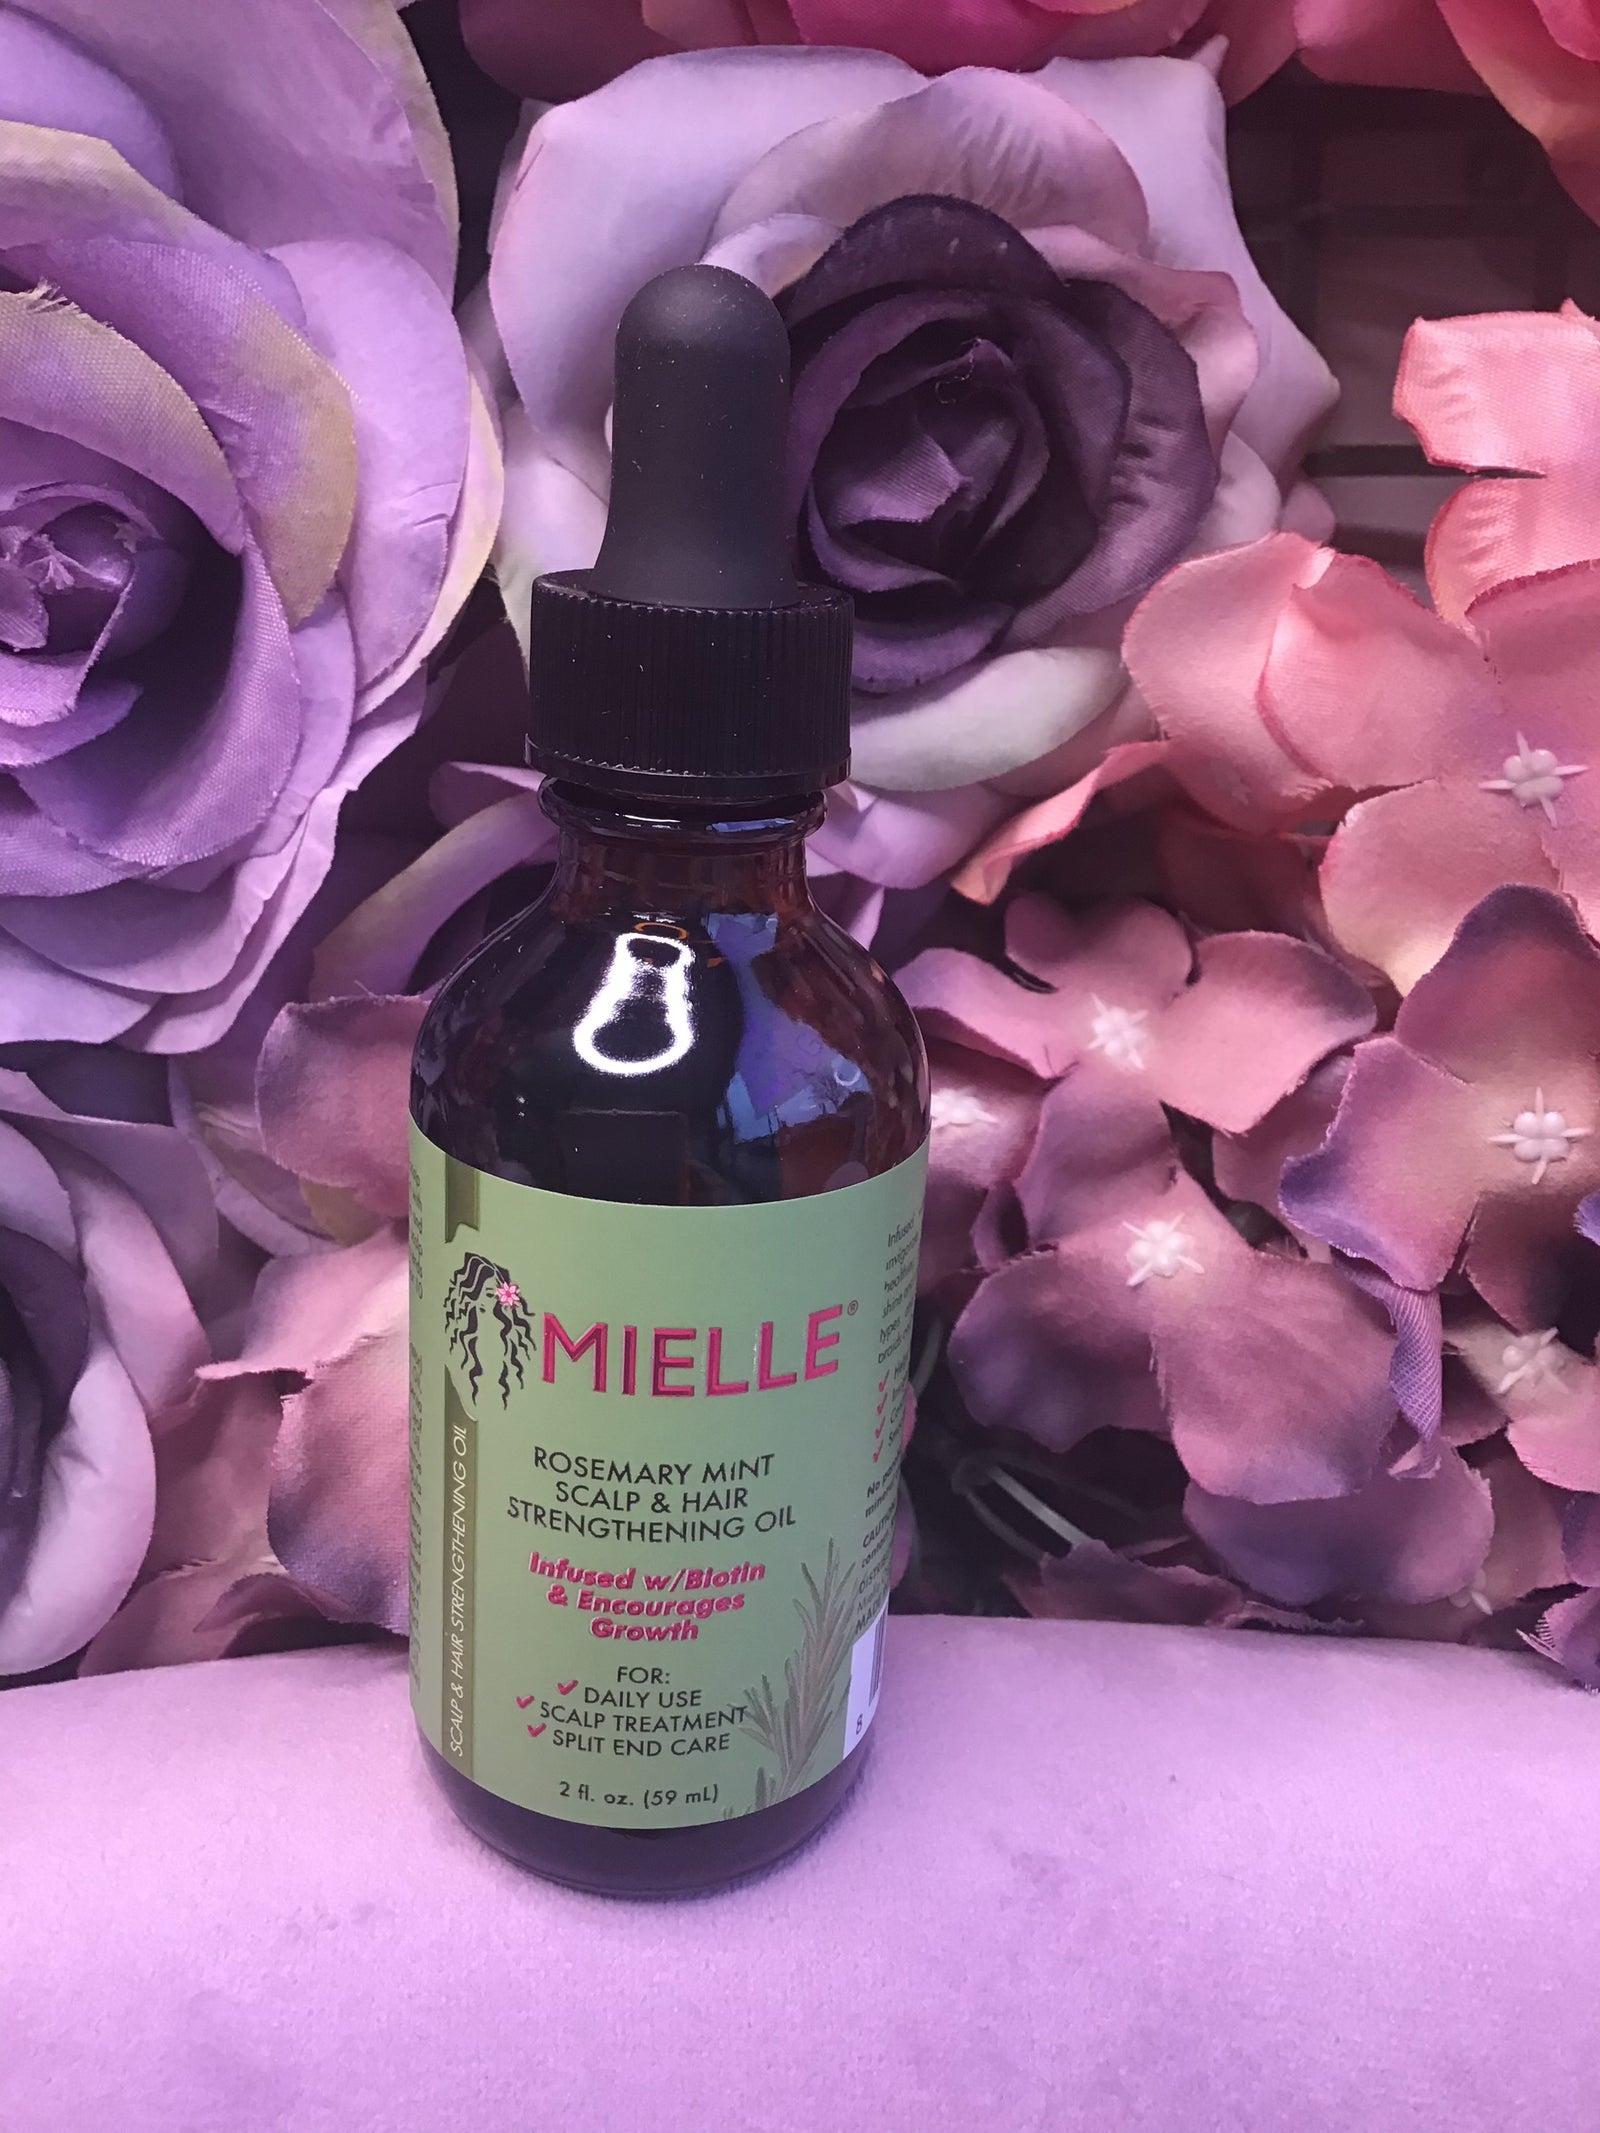 The Mielle Organics Rosemary Mint Oil has BLOWN UP for a reason